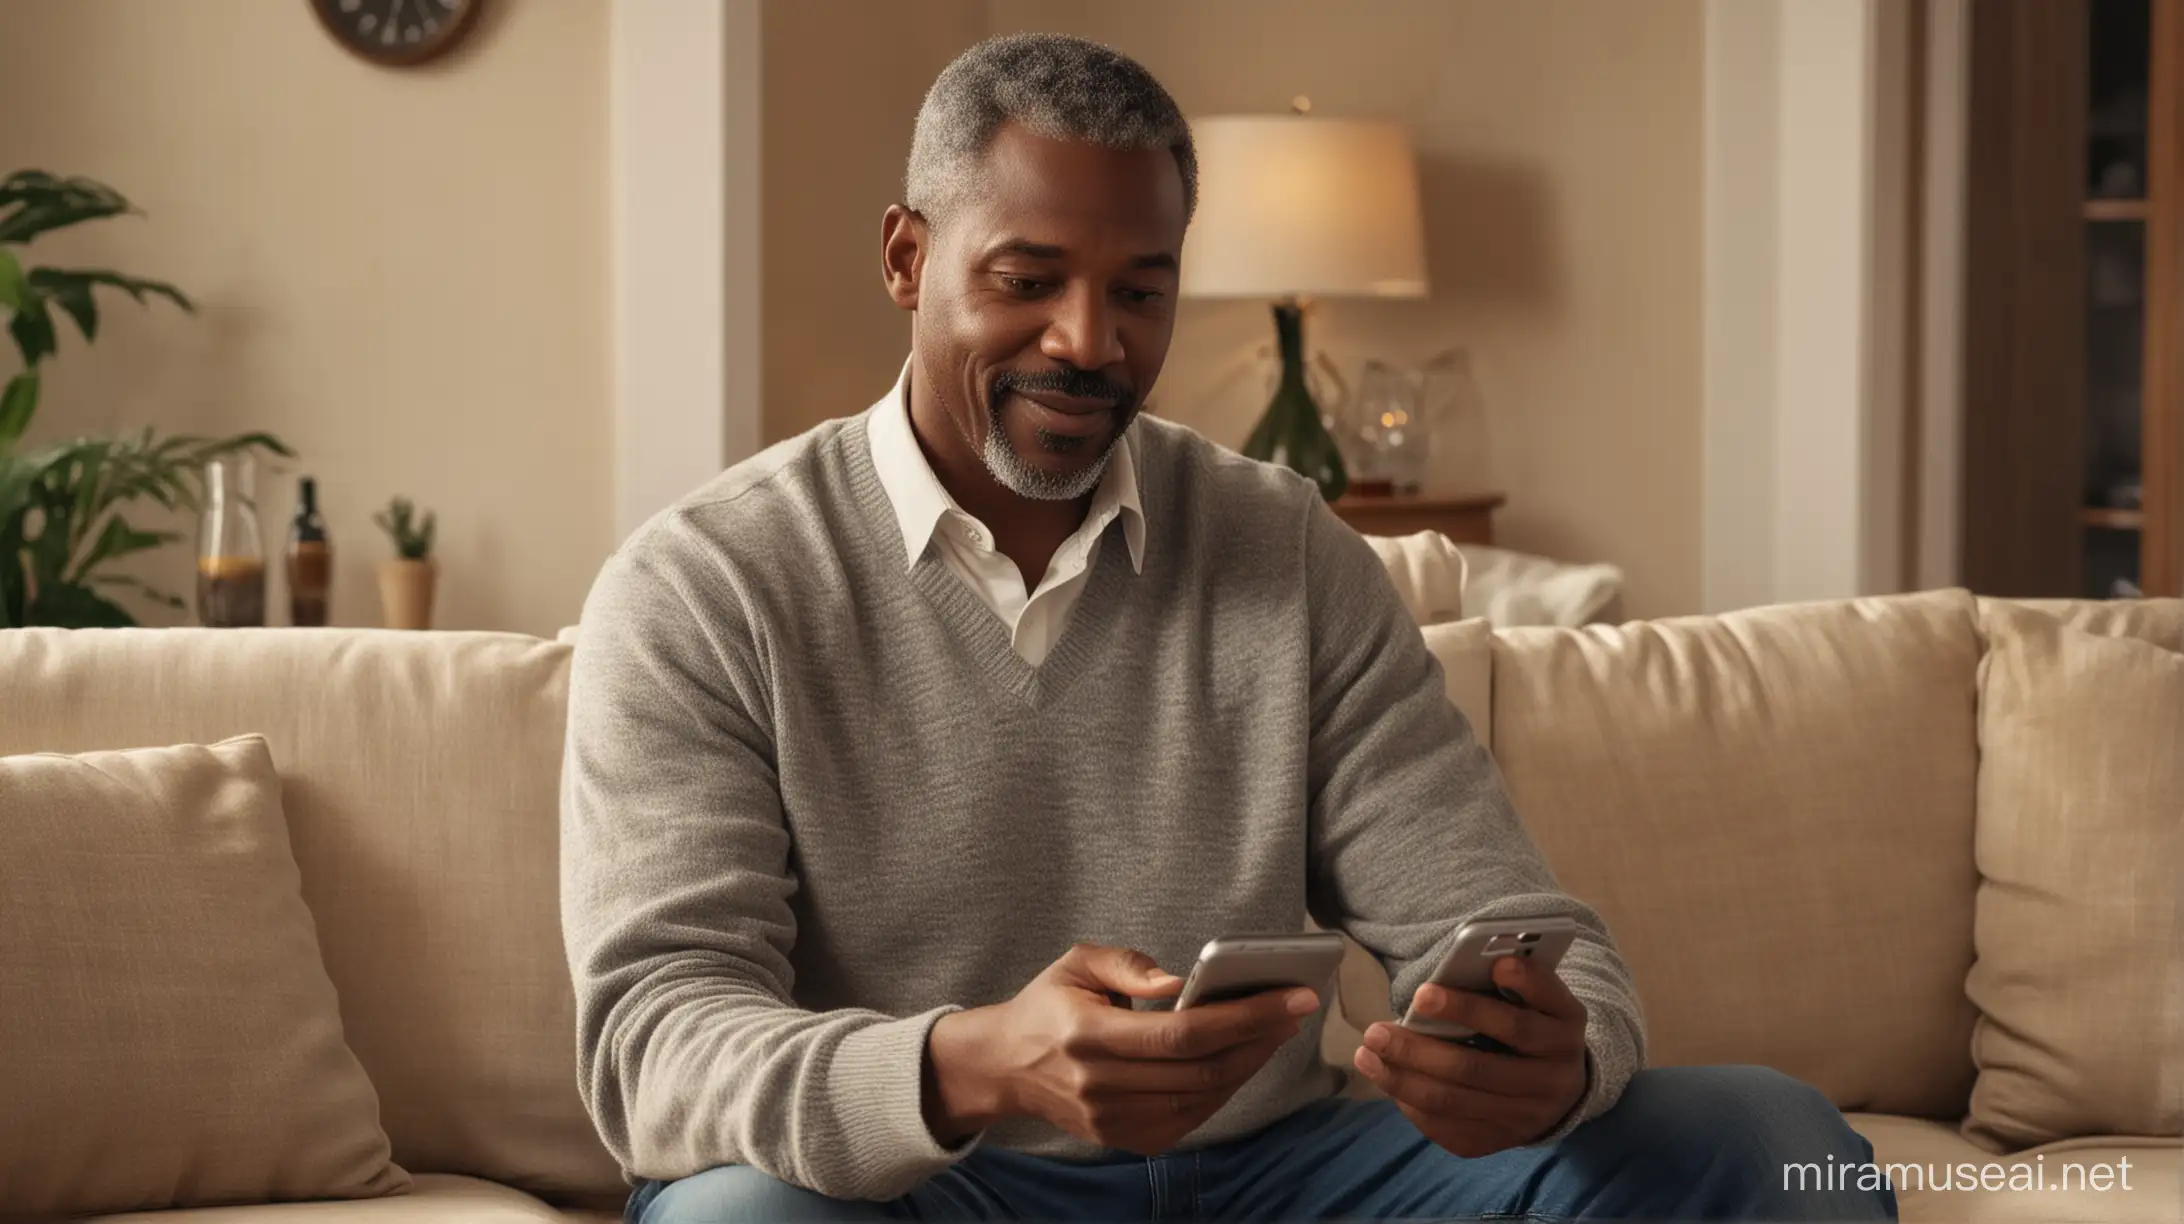 Digital Connection for Mature Generations Mature Male blackman Engaging with Online News and Messaging on His Phone in a Cozy Home Setting